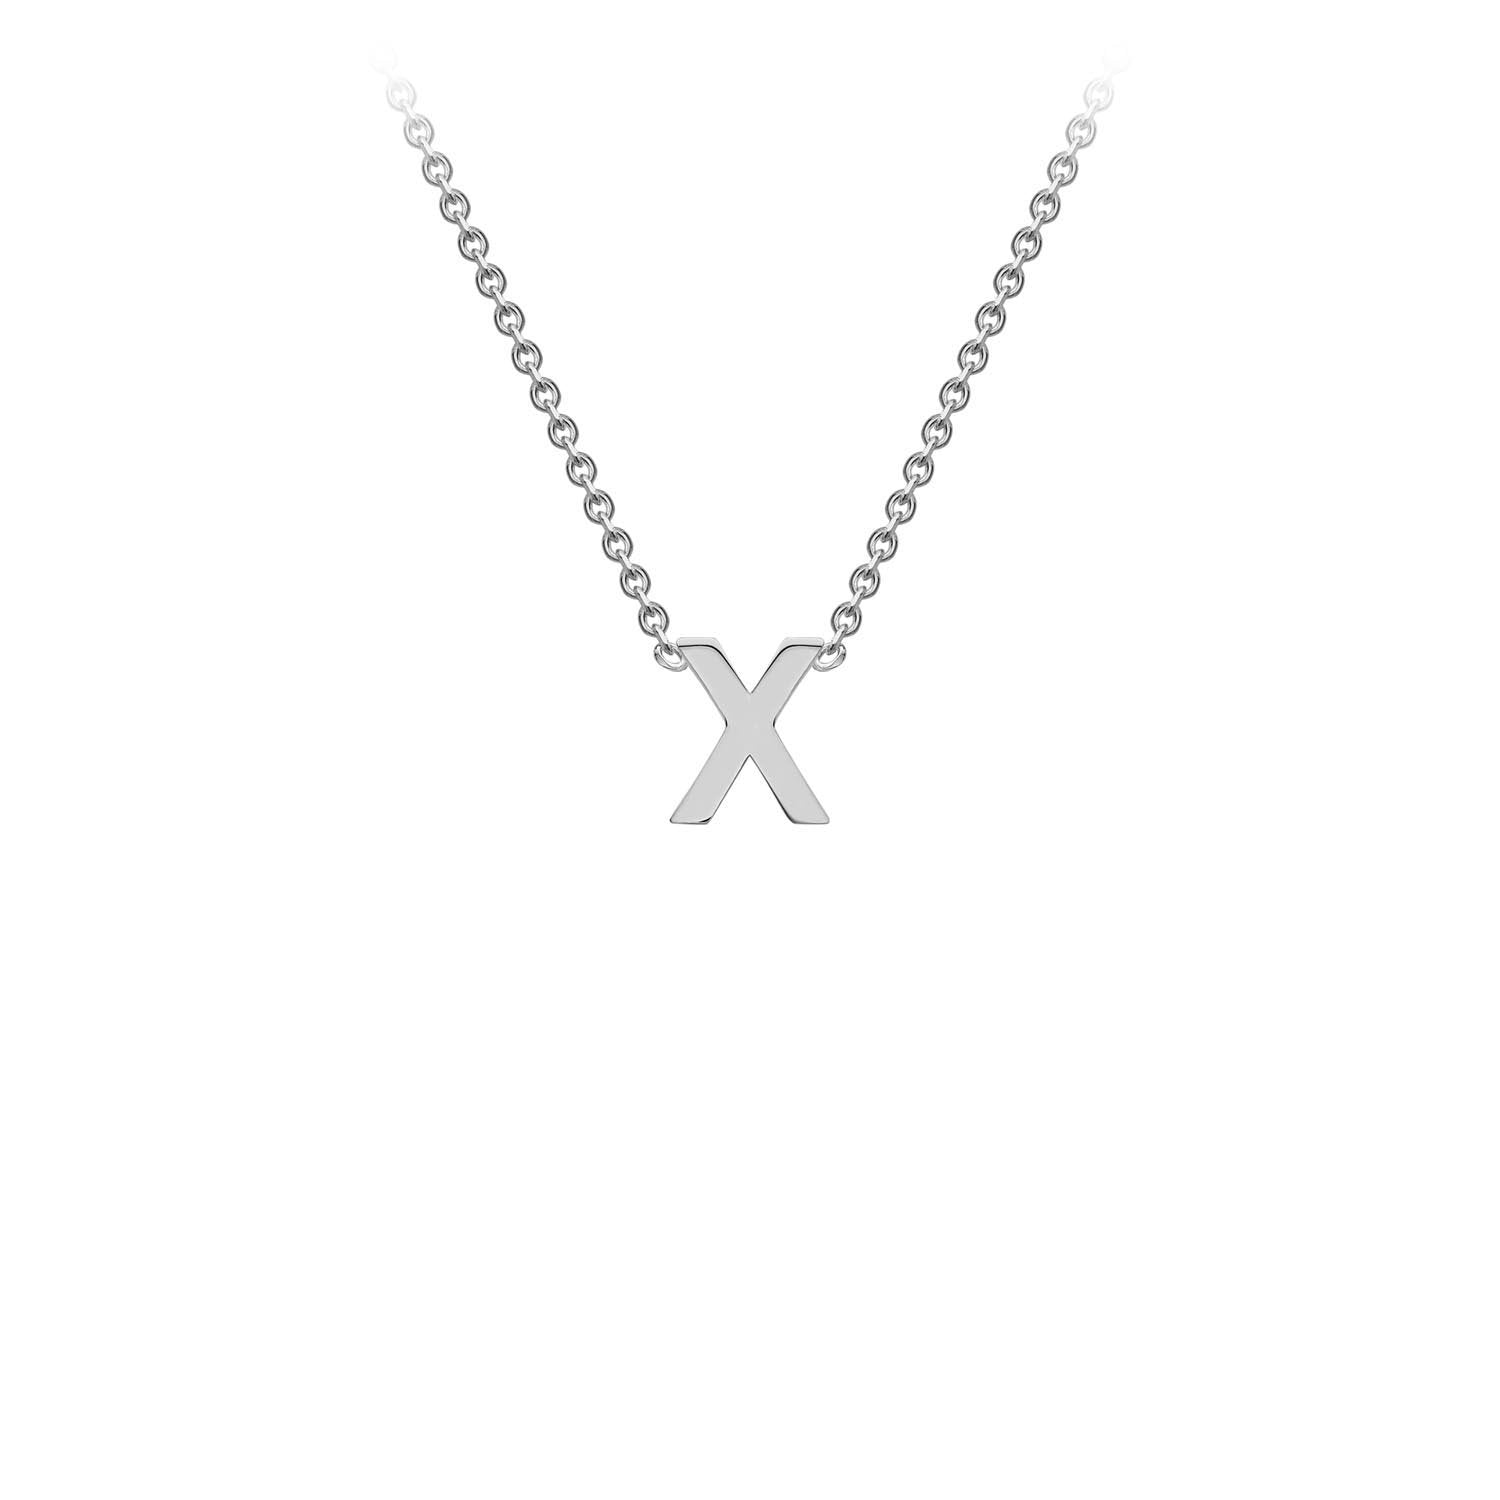 9ct White Gold 'X' Petite Initial Adjustable Letter Necklace 38/43cm